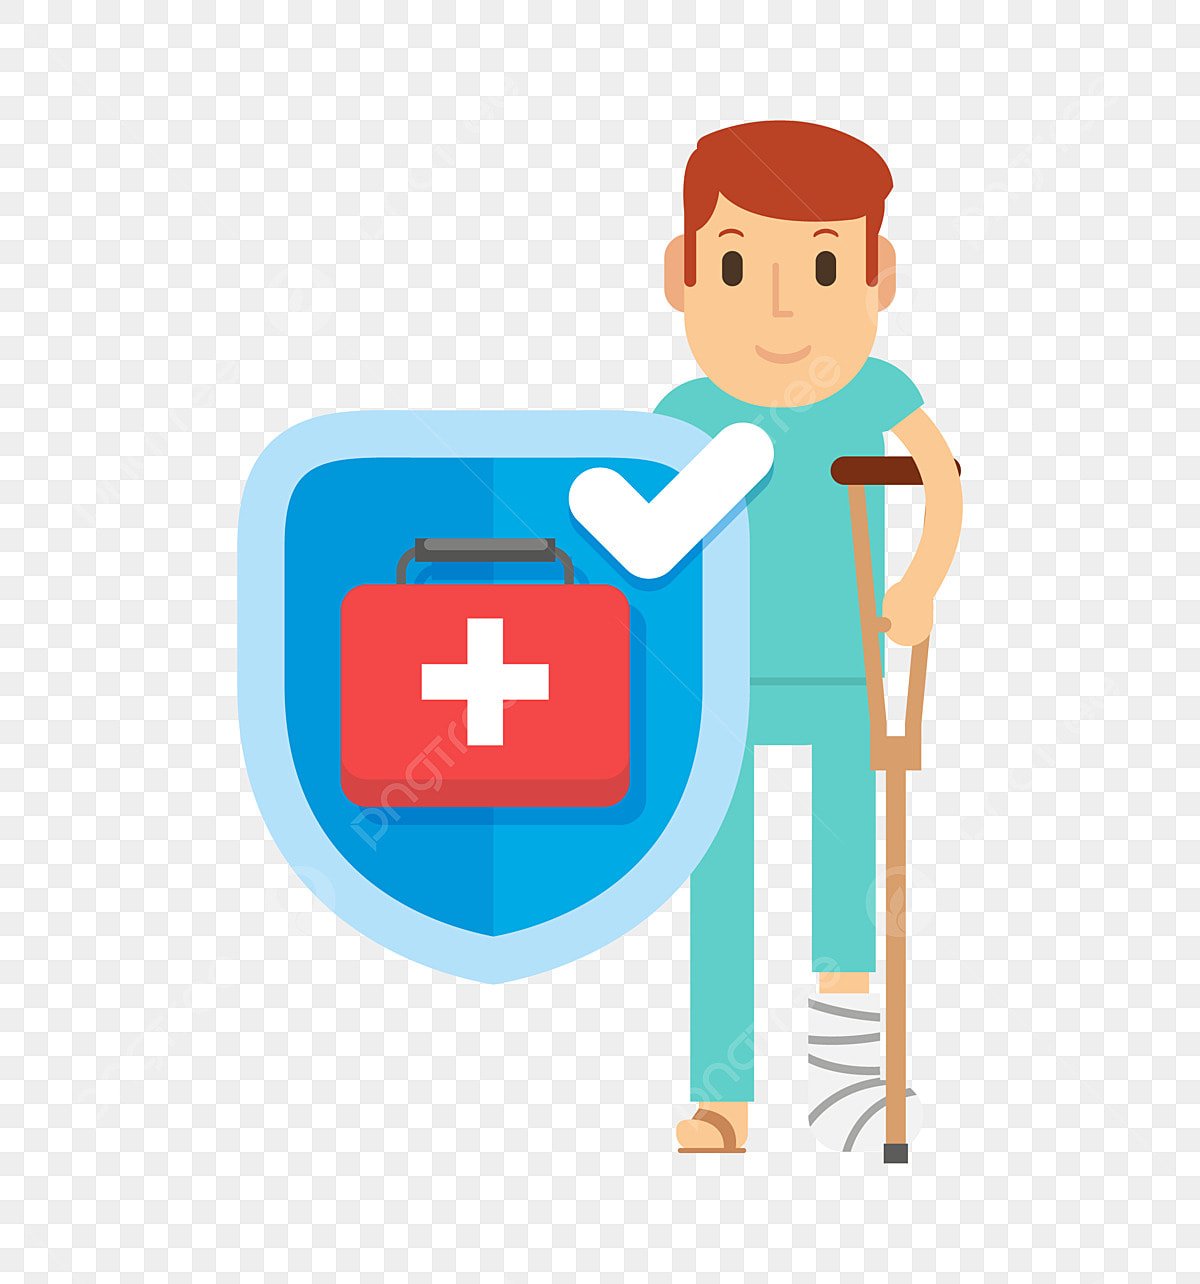 Health Insurance PNG Transparent Image Free Download